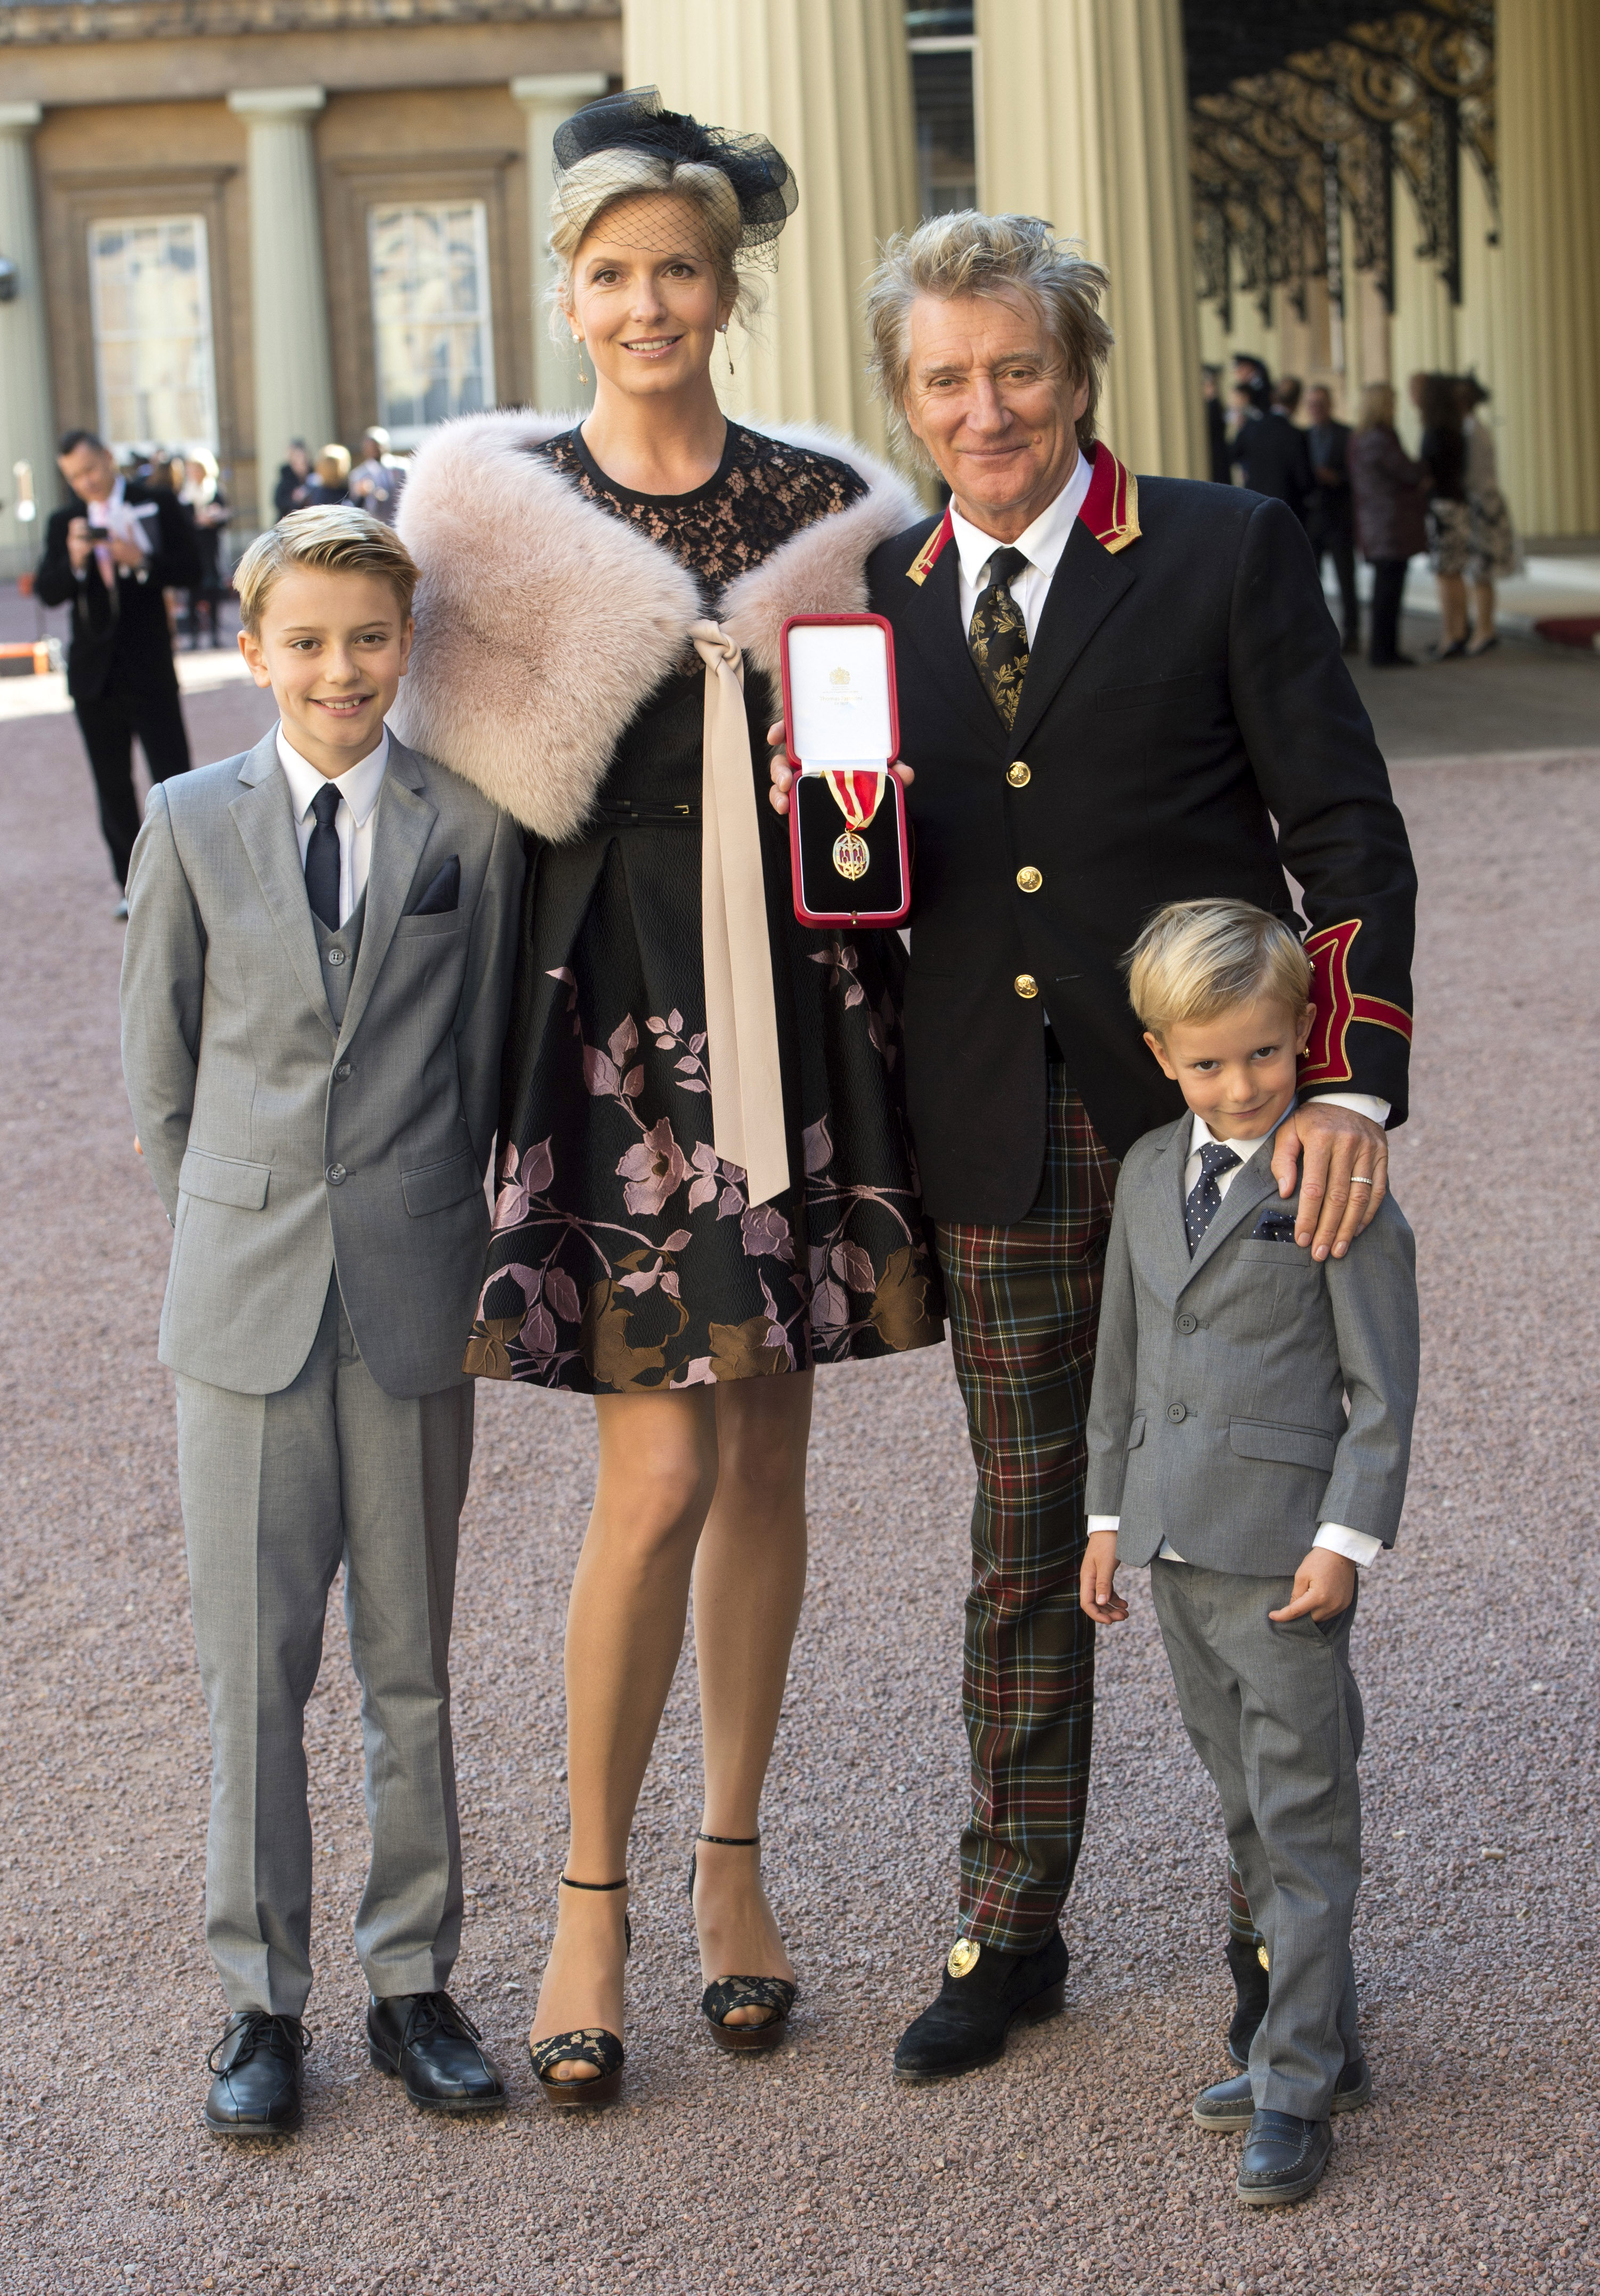 Rod Stewart and Penny Lancasterwith their children Alastair and Aiden in London in 2016 | Source: Getty Images